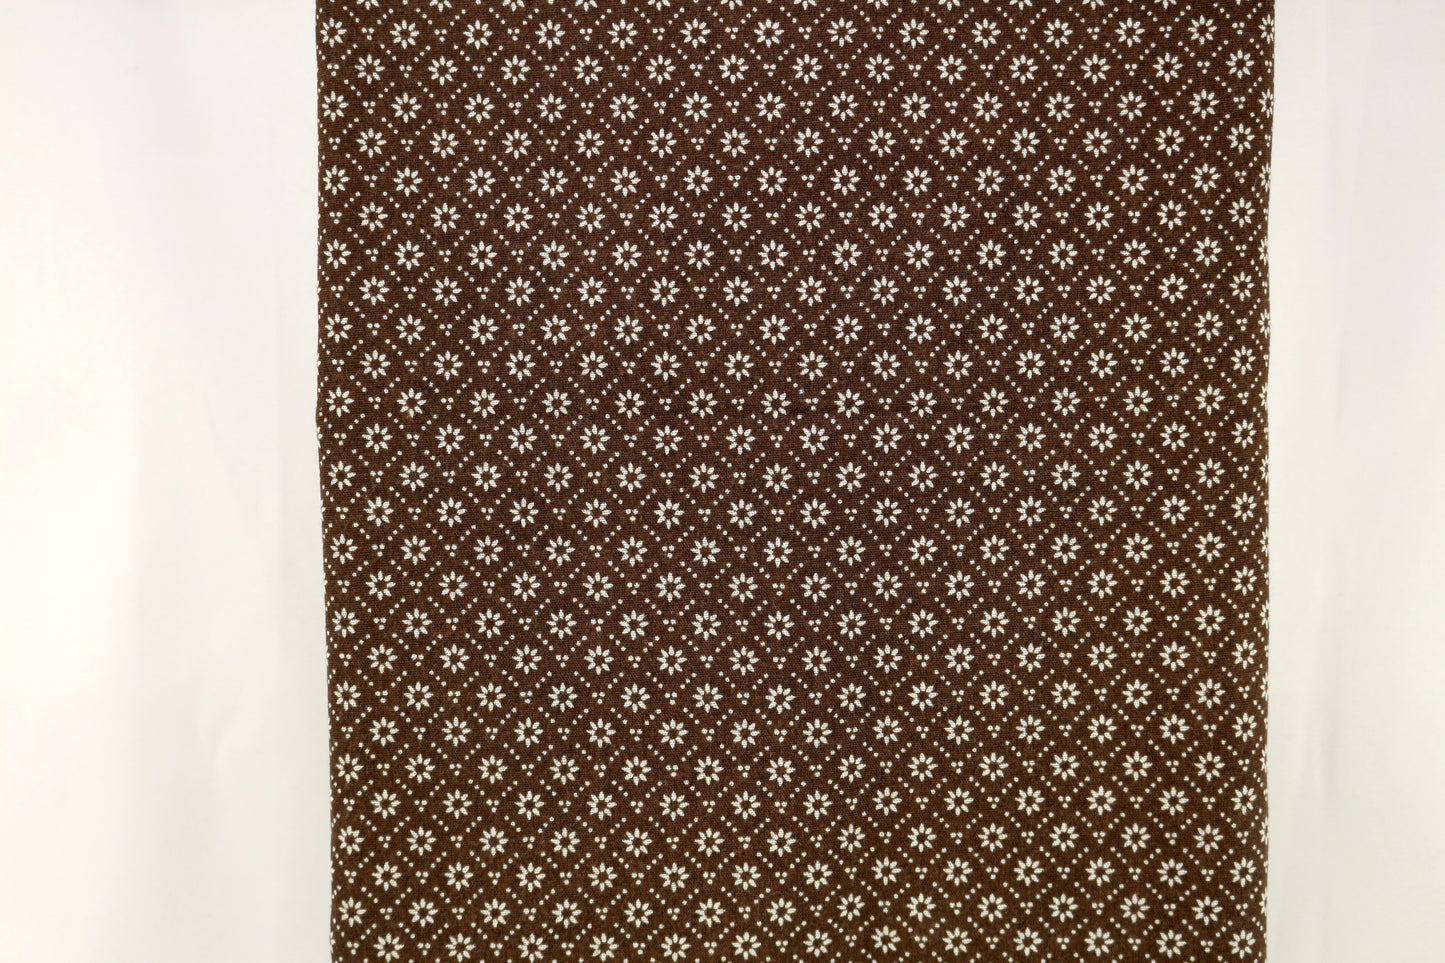 Cozy 70's Vibes Brown Daisies Cotton Fabric 45" x 4 yds